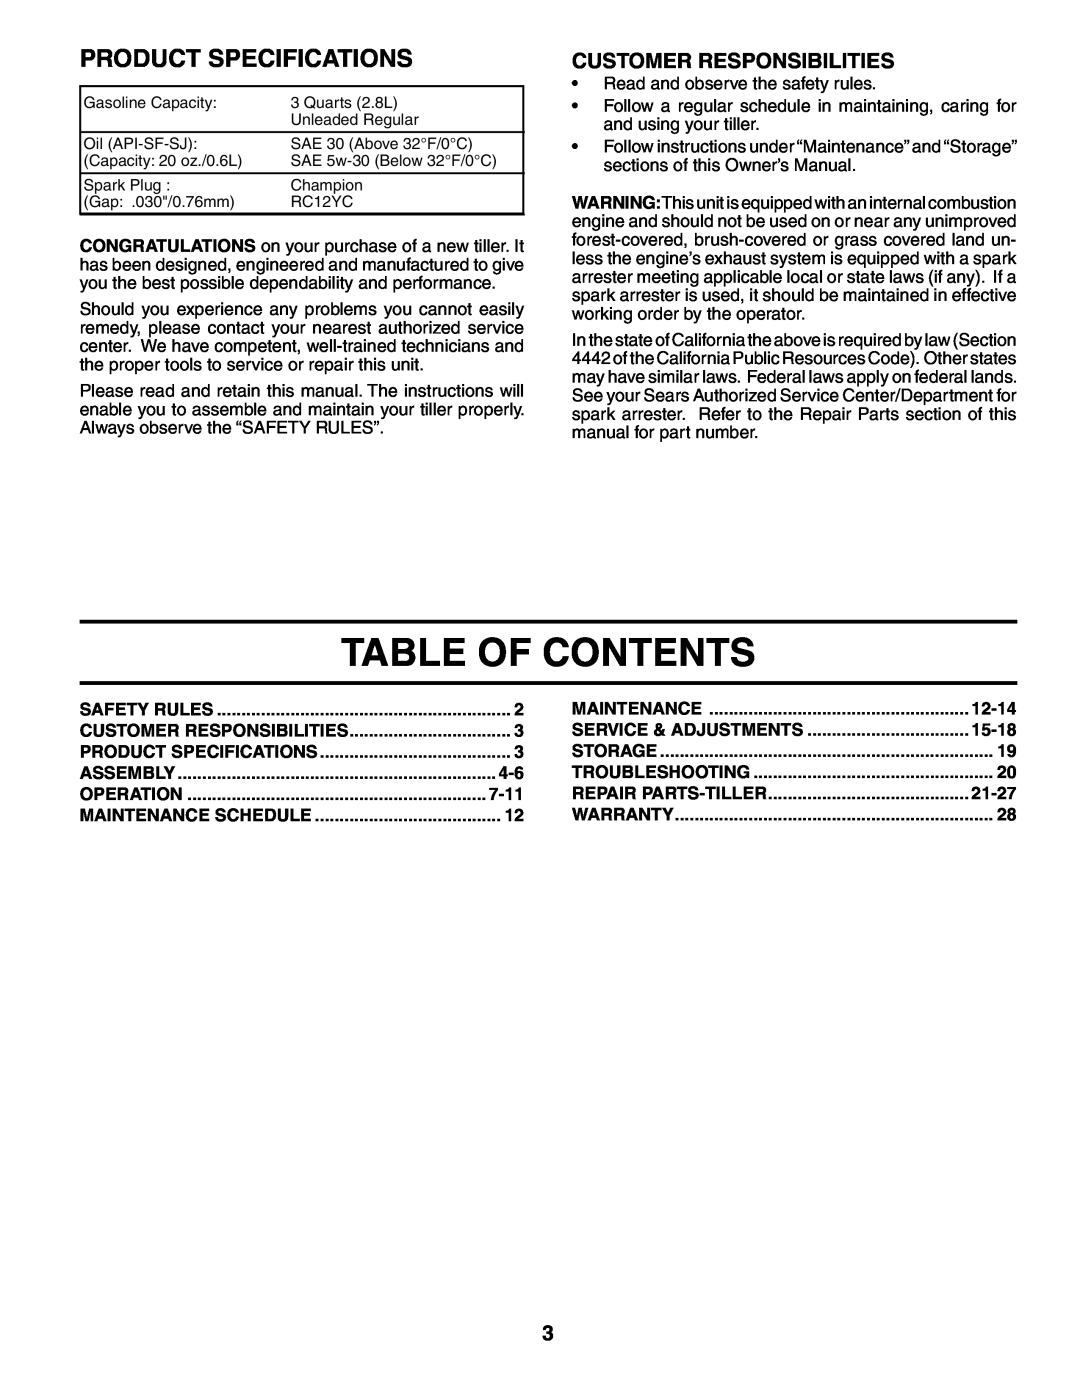 Poulan 190388 owner manual Table Of Contents, Product Specifications, Customer Responsibilities 